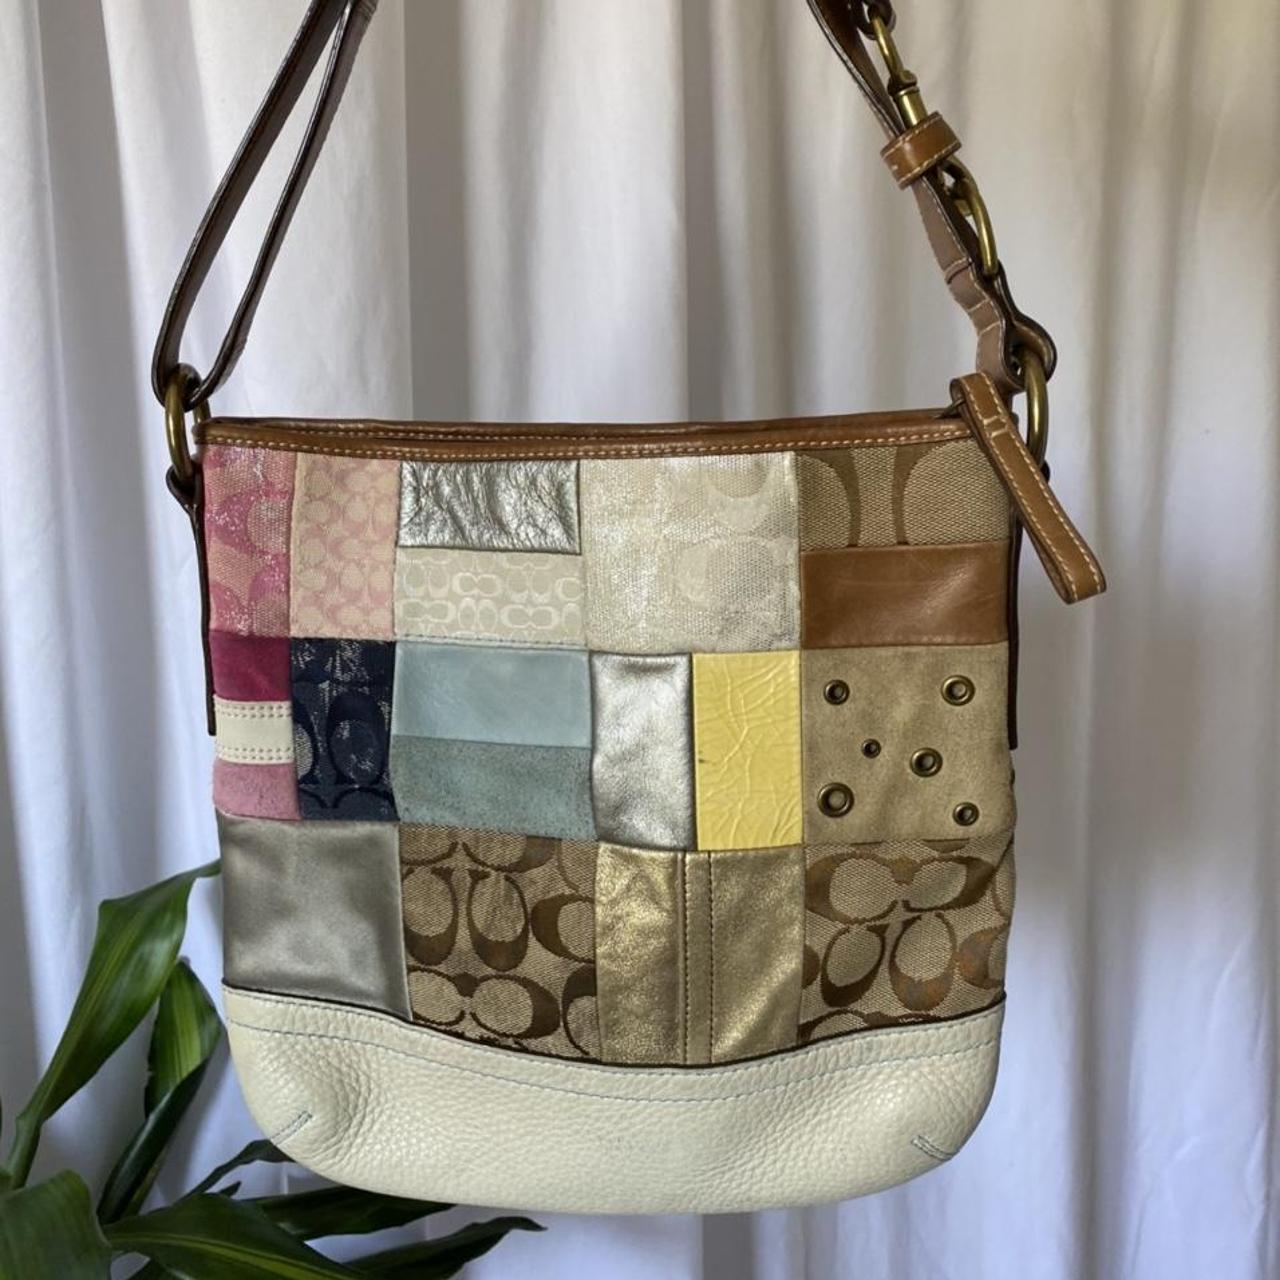 Patchwork leather bag Good condition some wear on - Depop